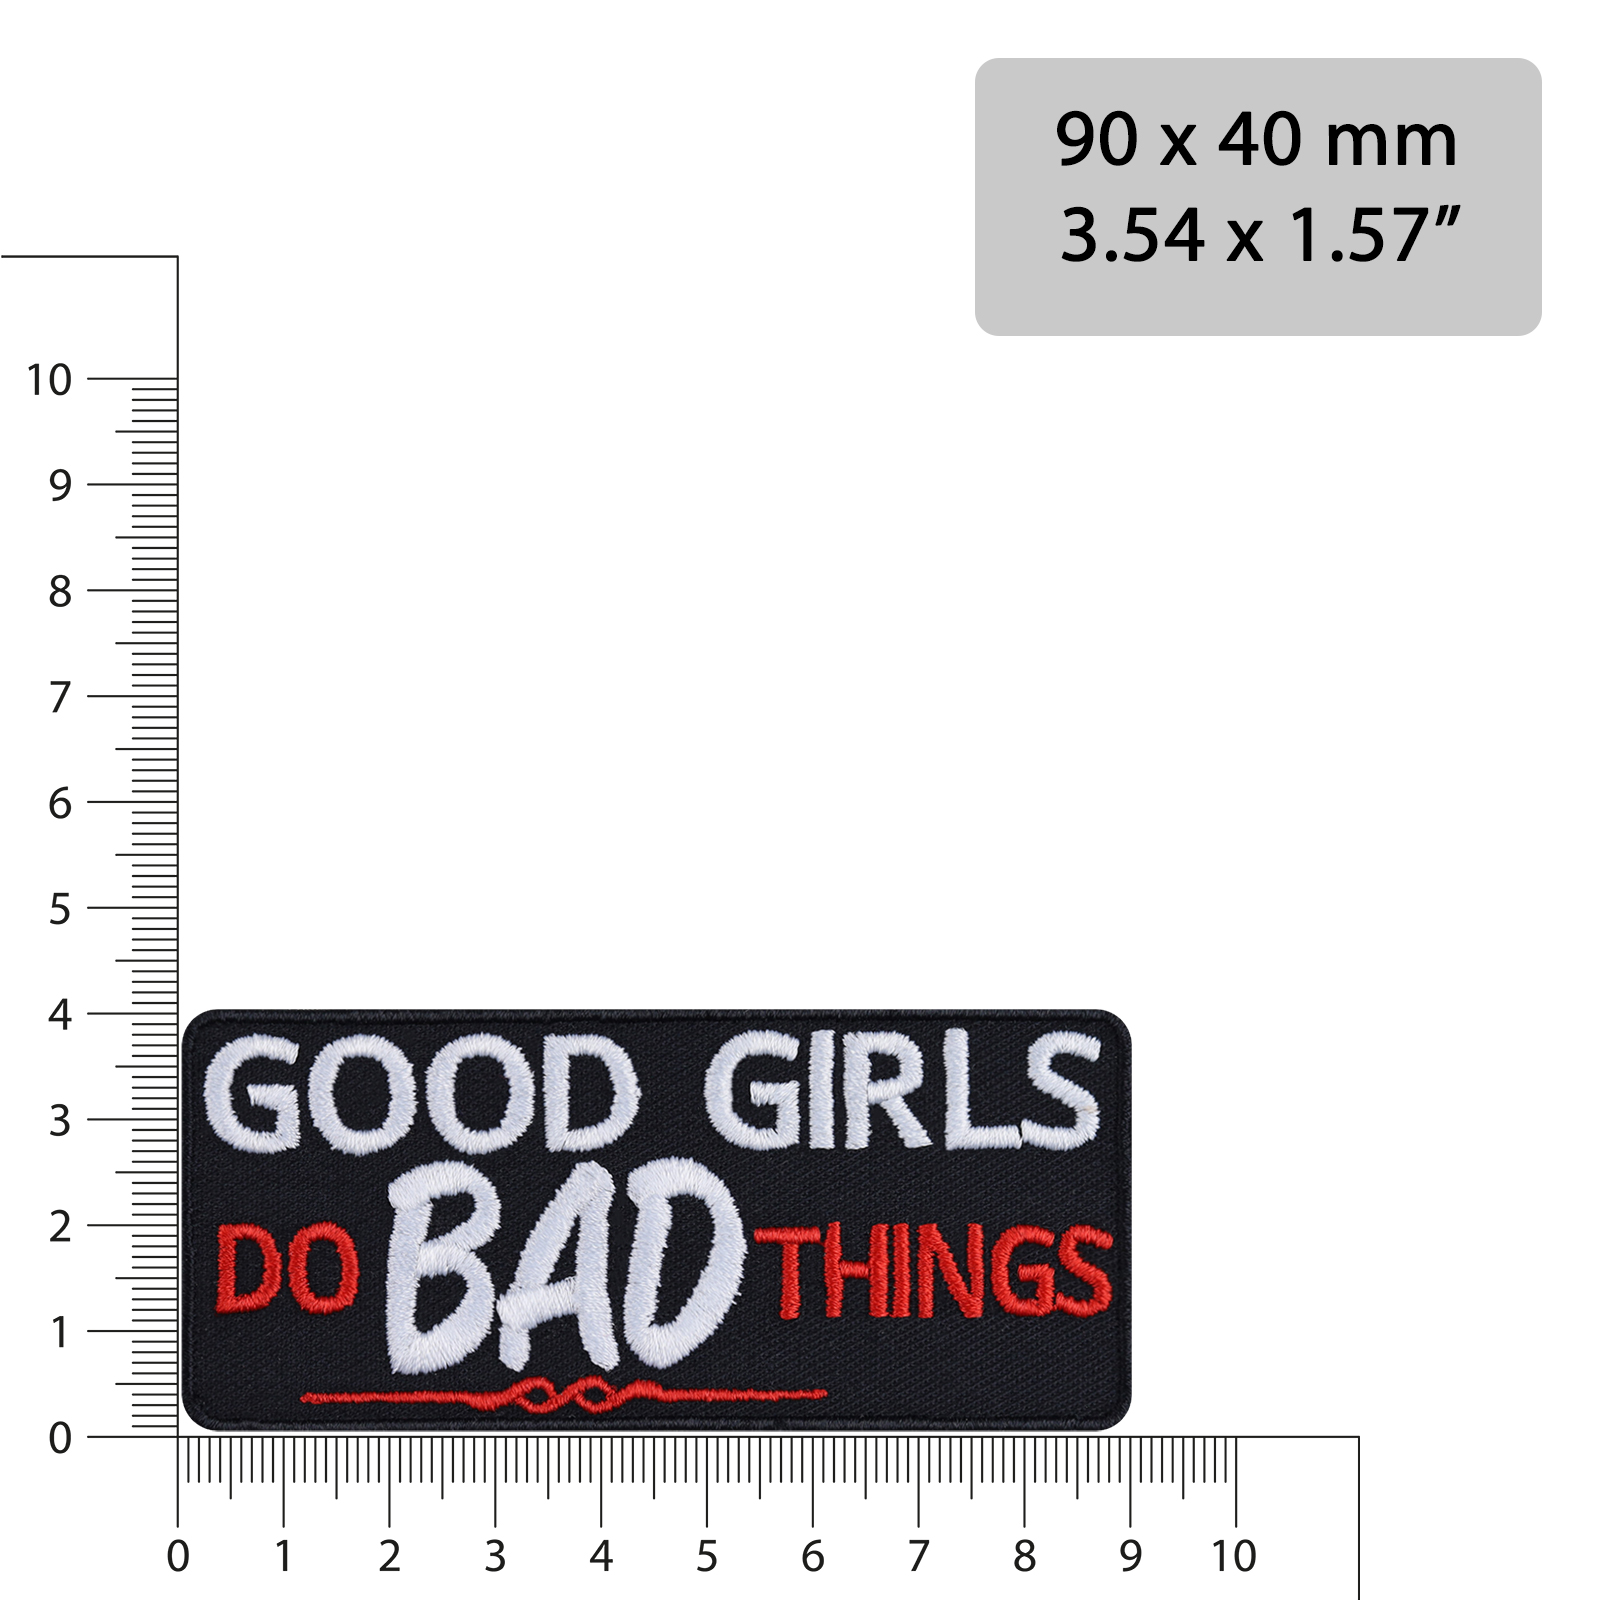 Good girls do bad things - Patch